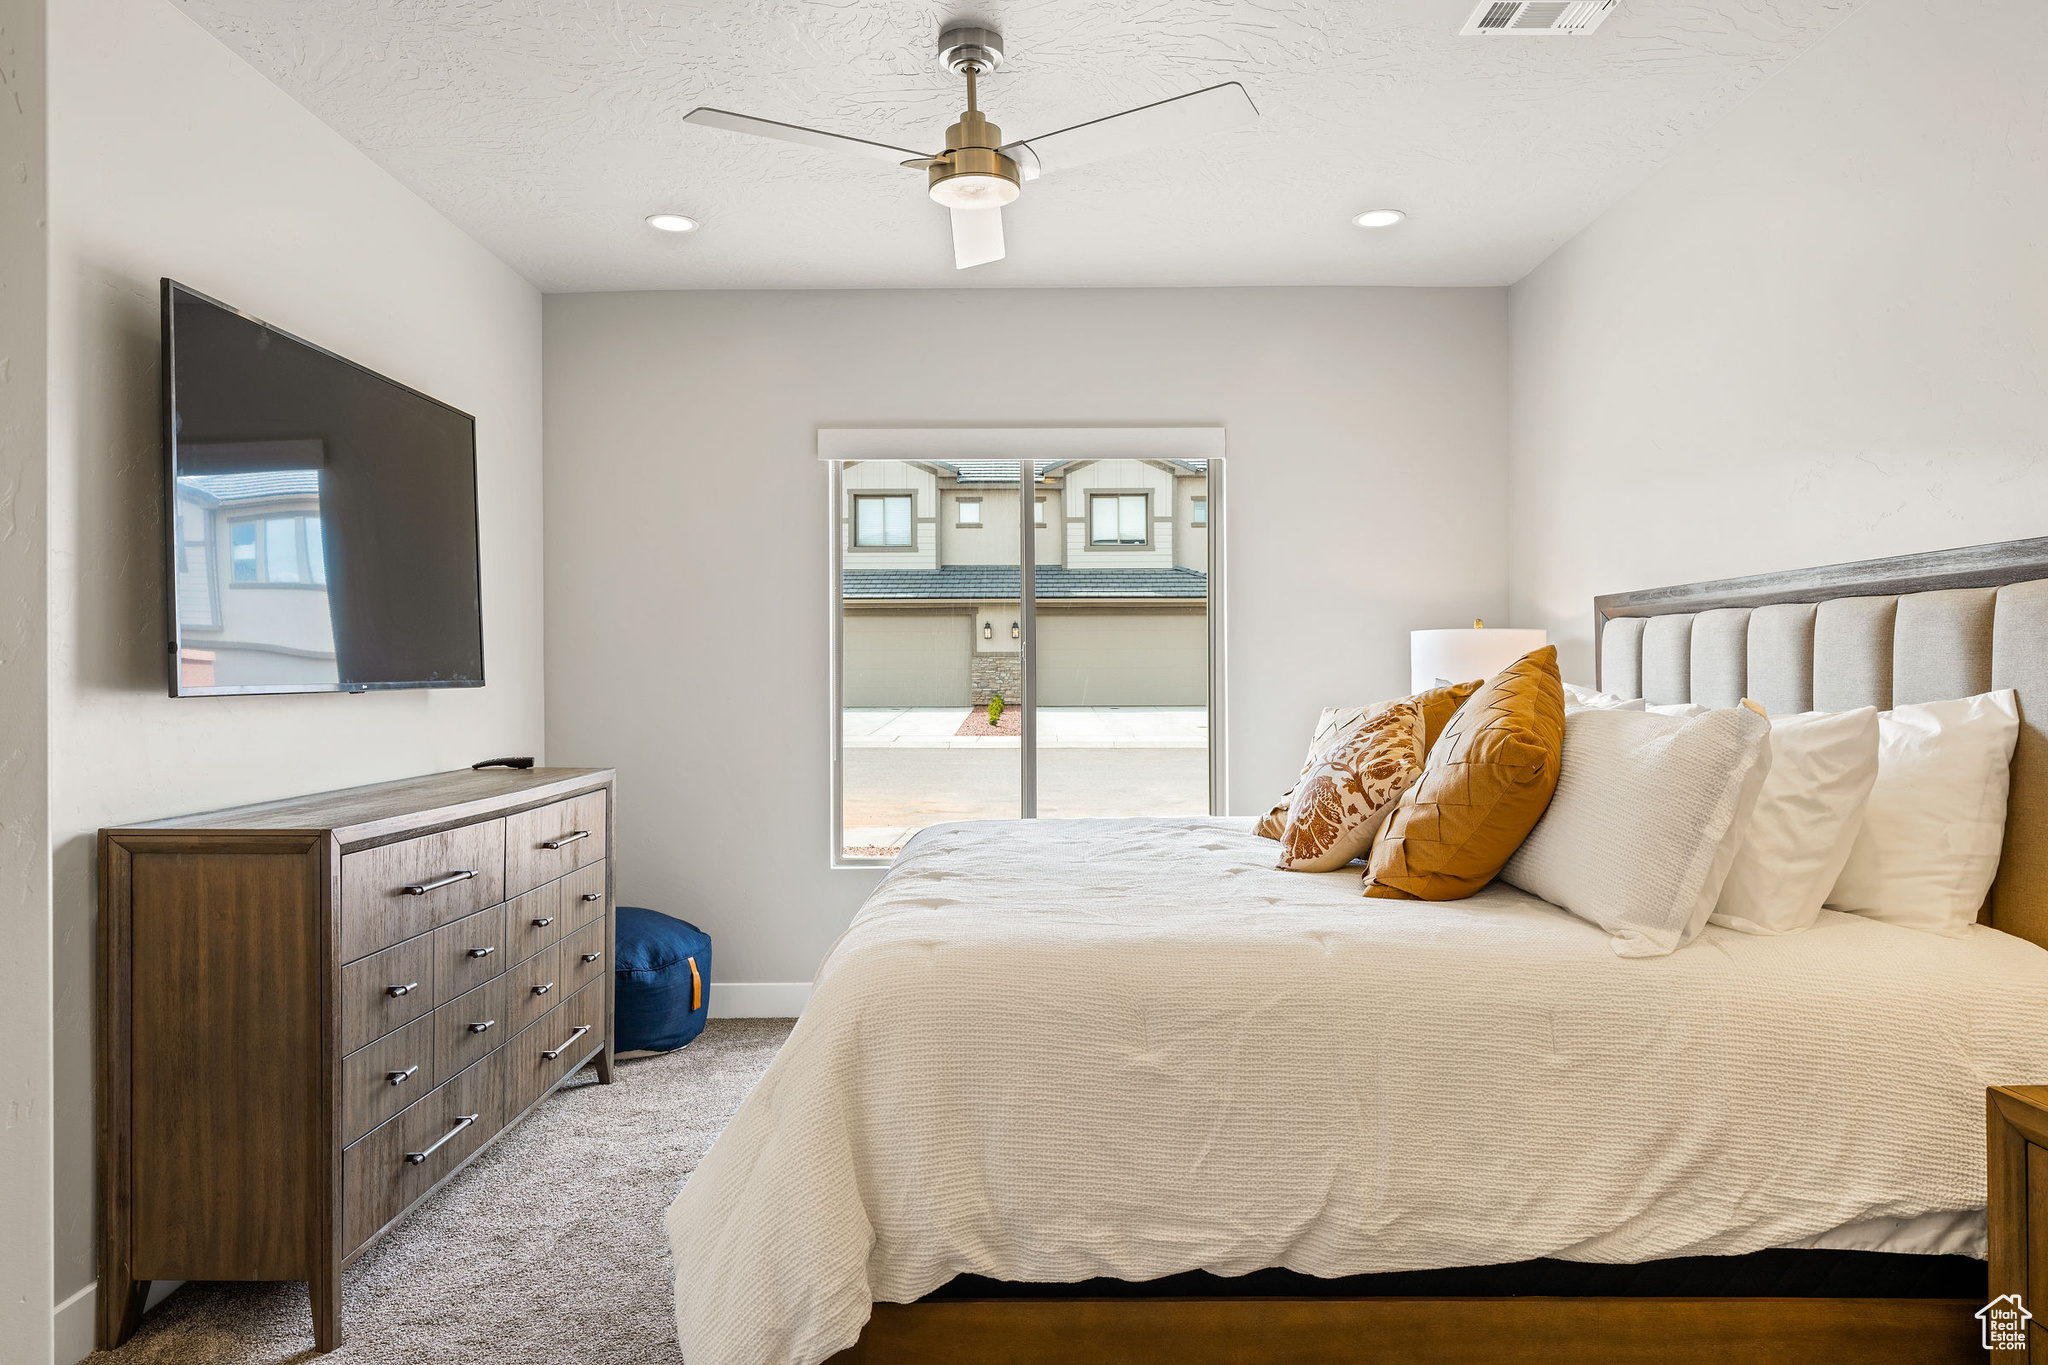 Bedroom with light carpet, ceiling fan, and a textured ceiling